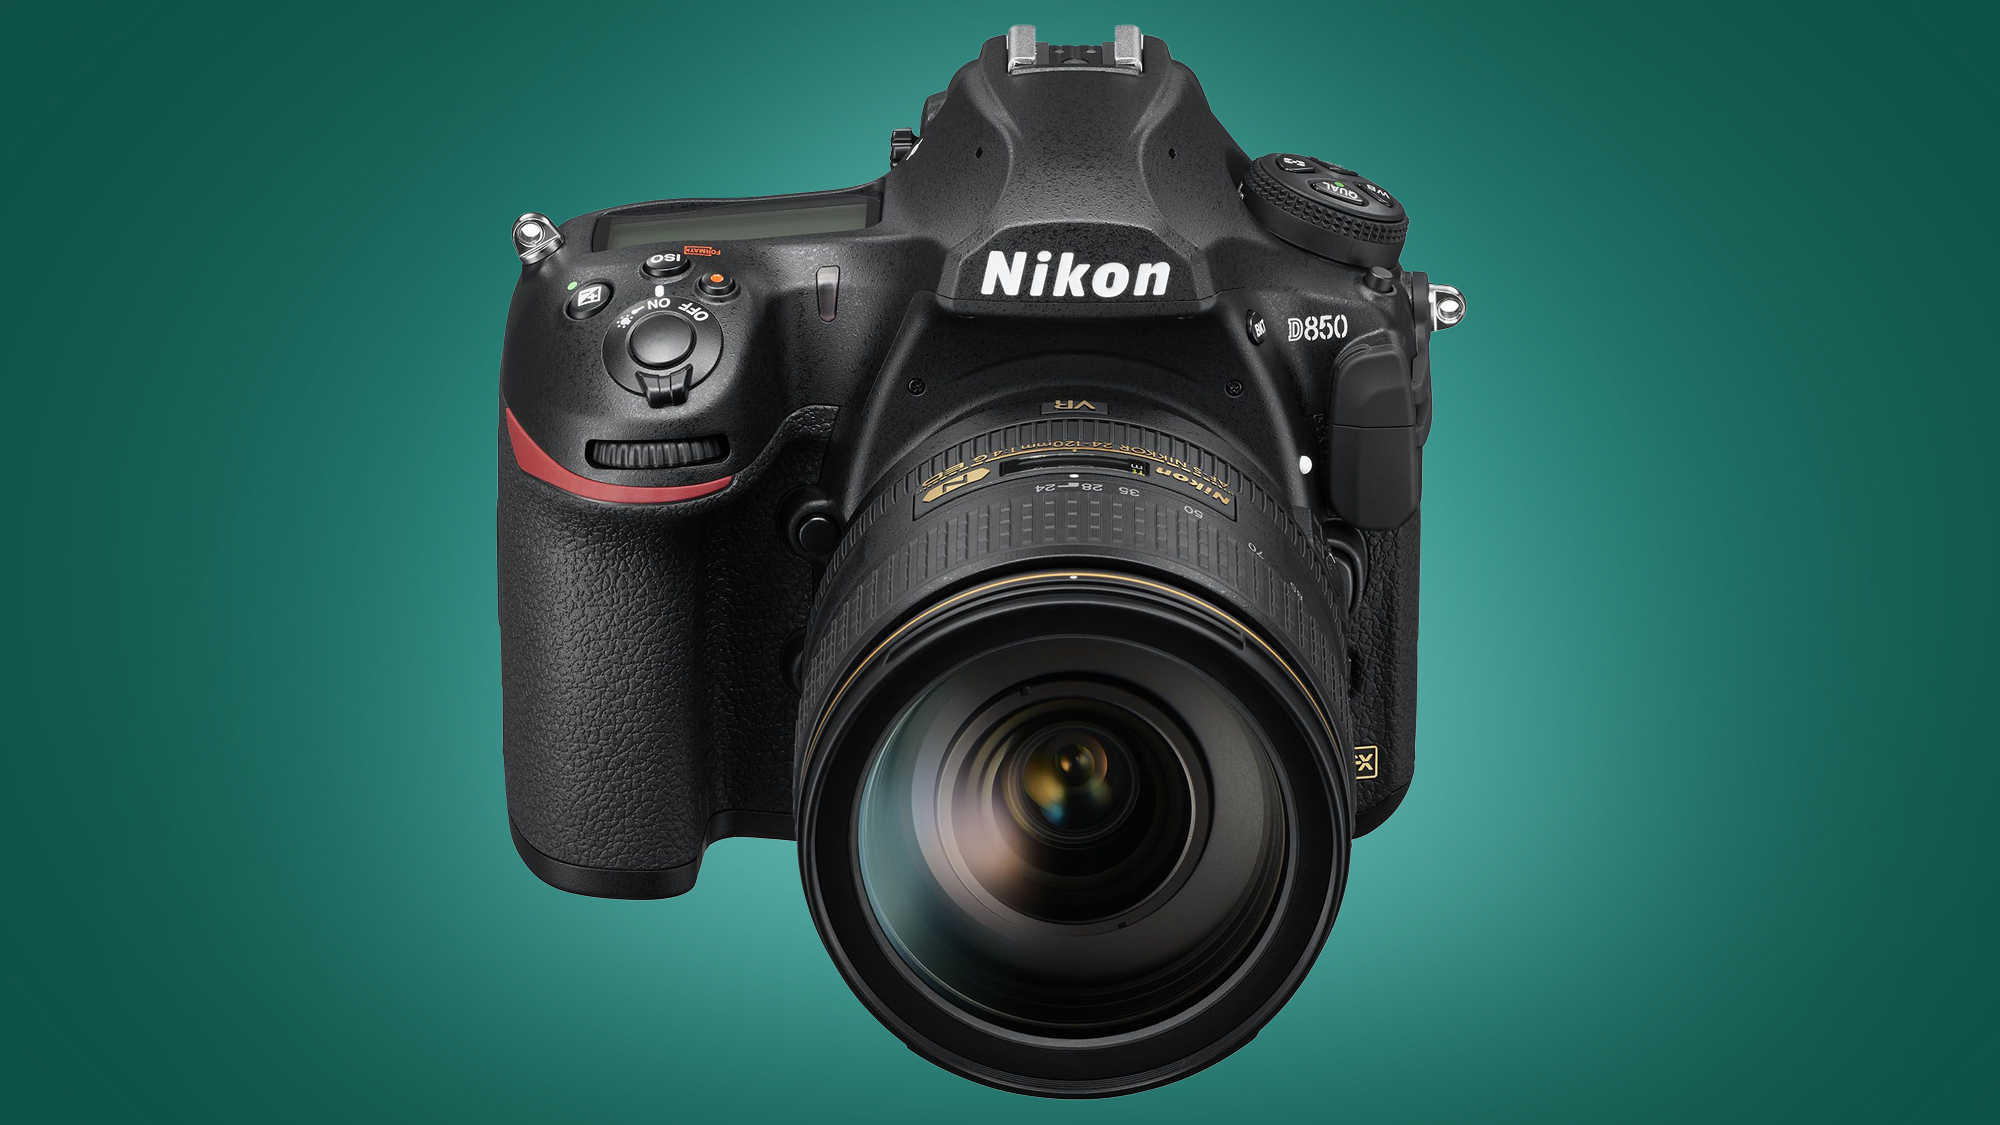 The NIkon D850 DSLR on a green background